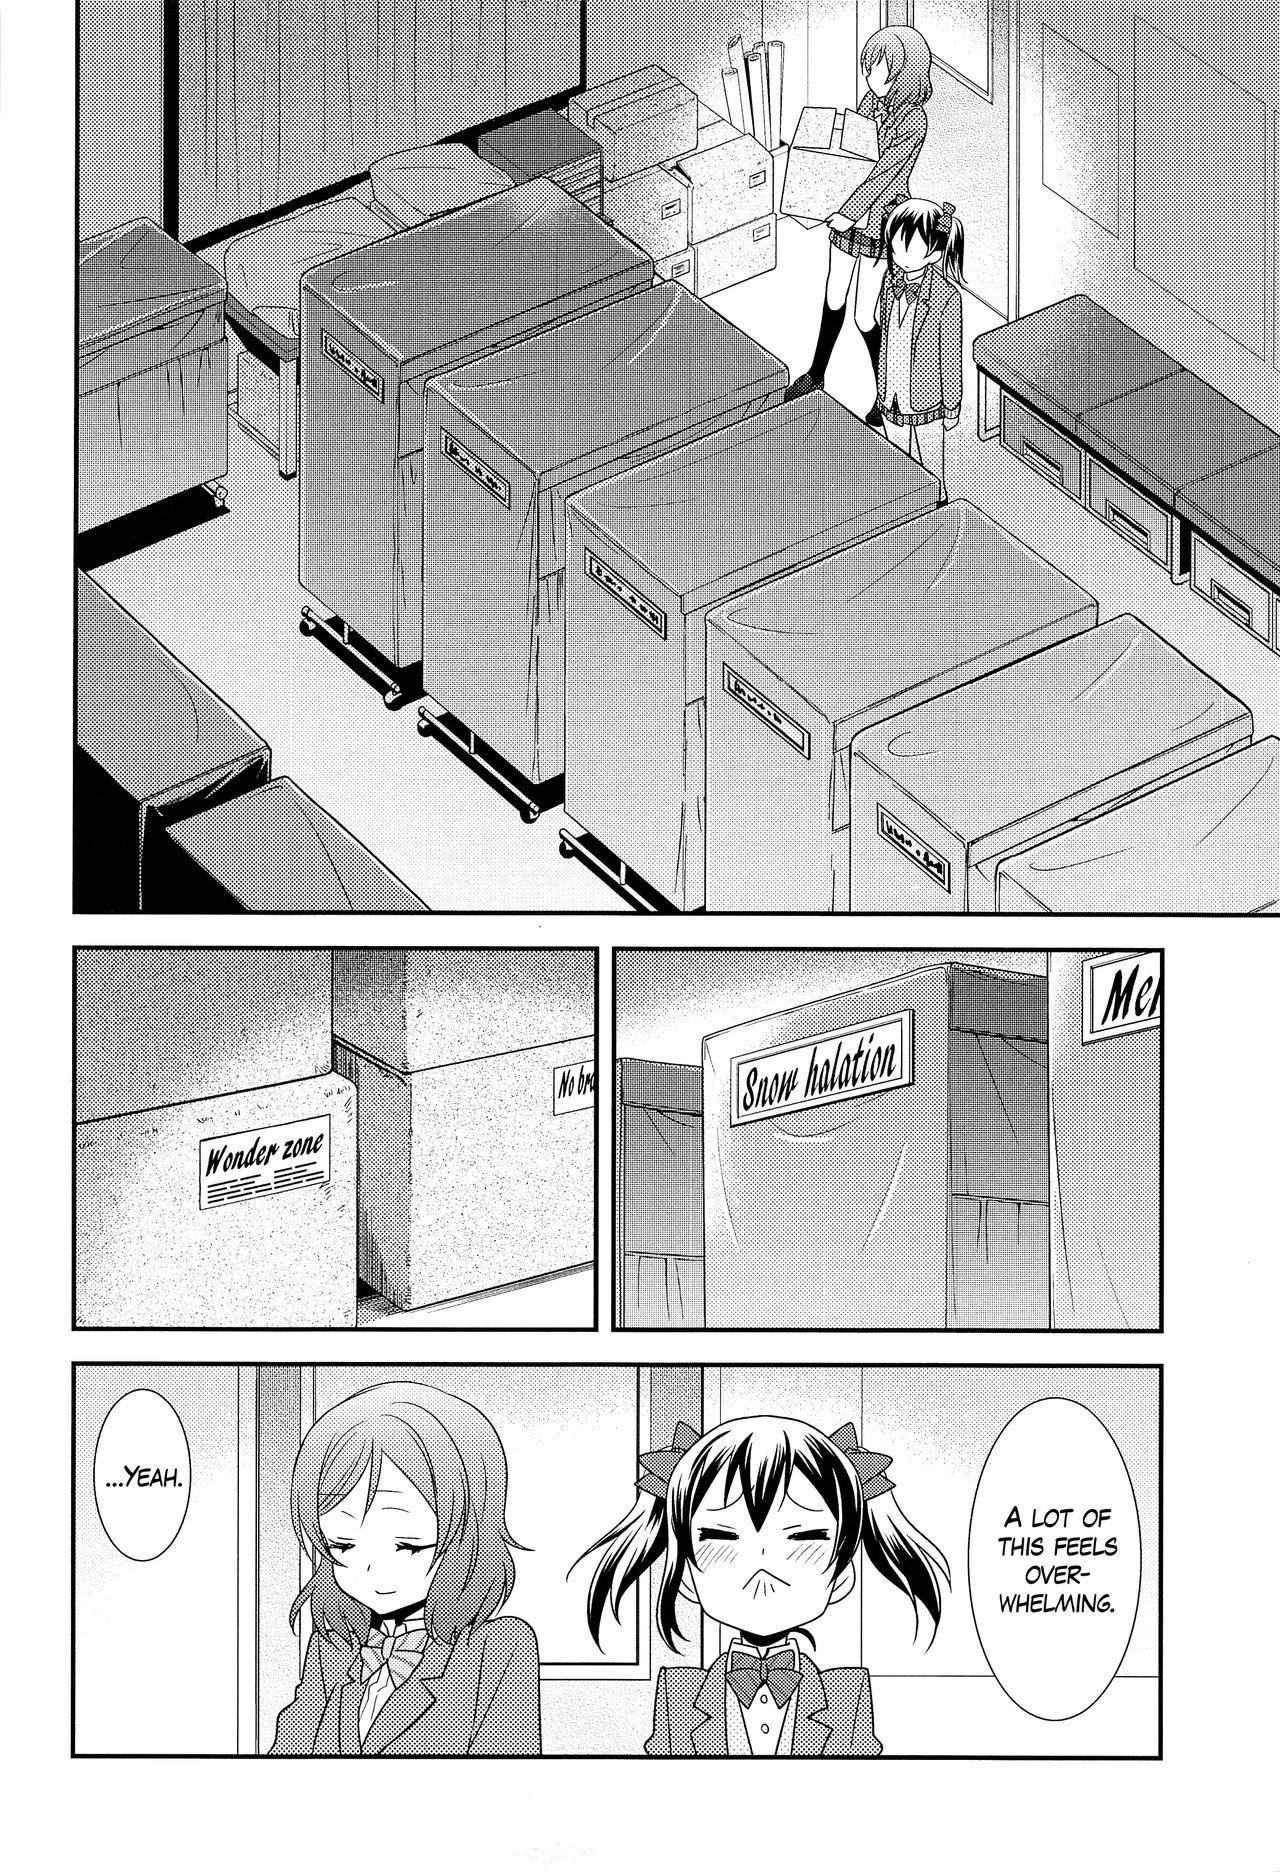 Butts Bokura no Te ni wa Ai Shika nai. | There’s Nothing but Love In Our Hands. - Love live Firsttime - Page 10